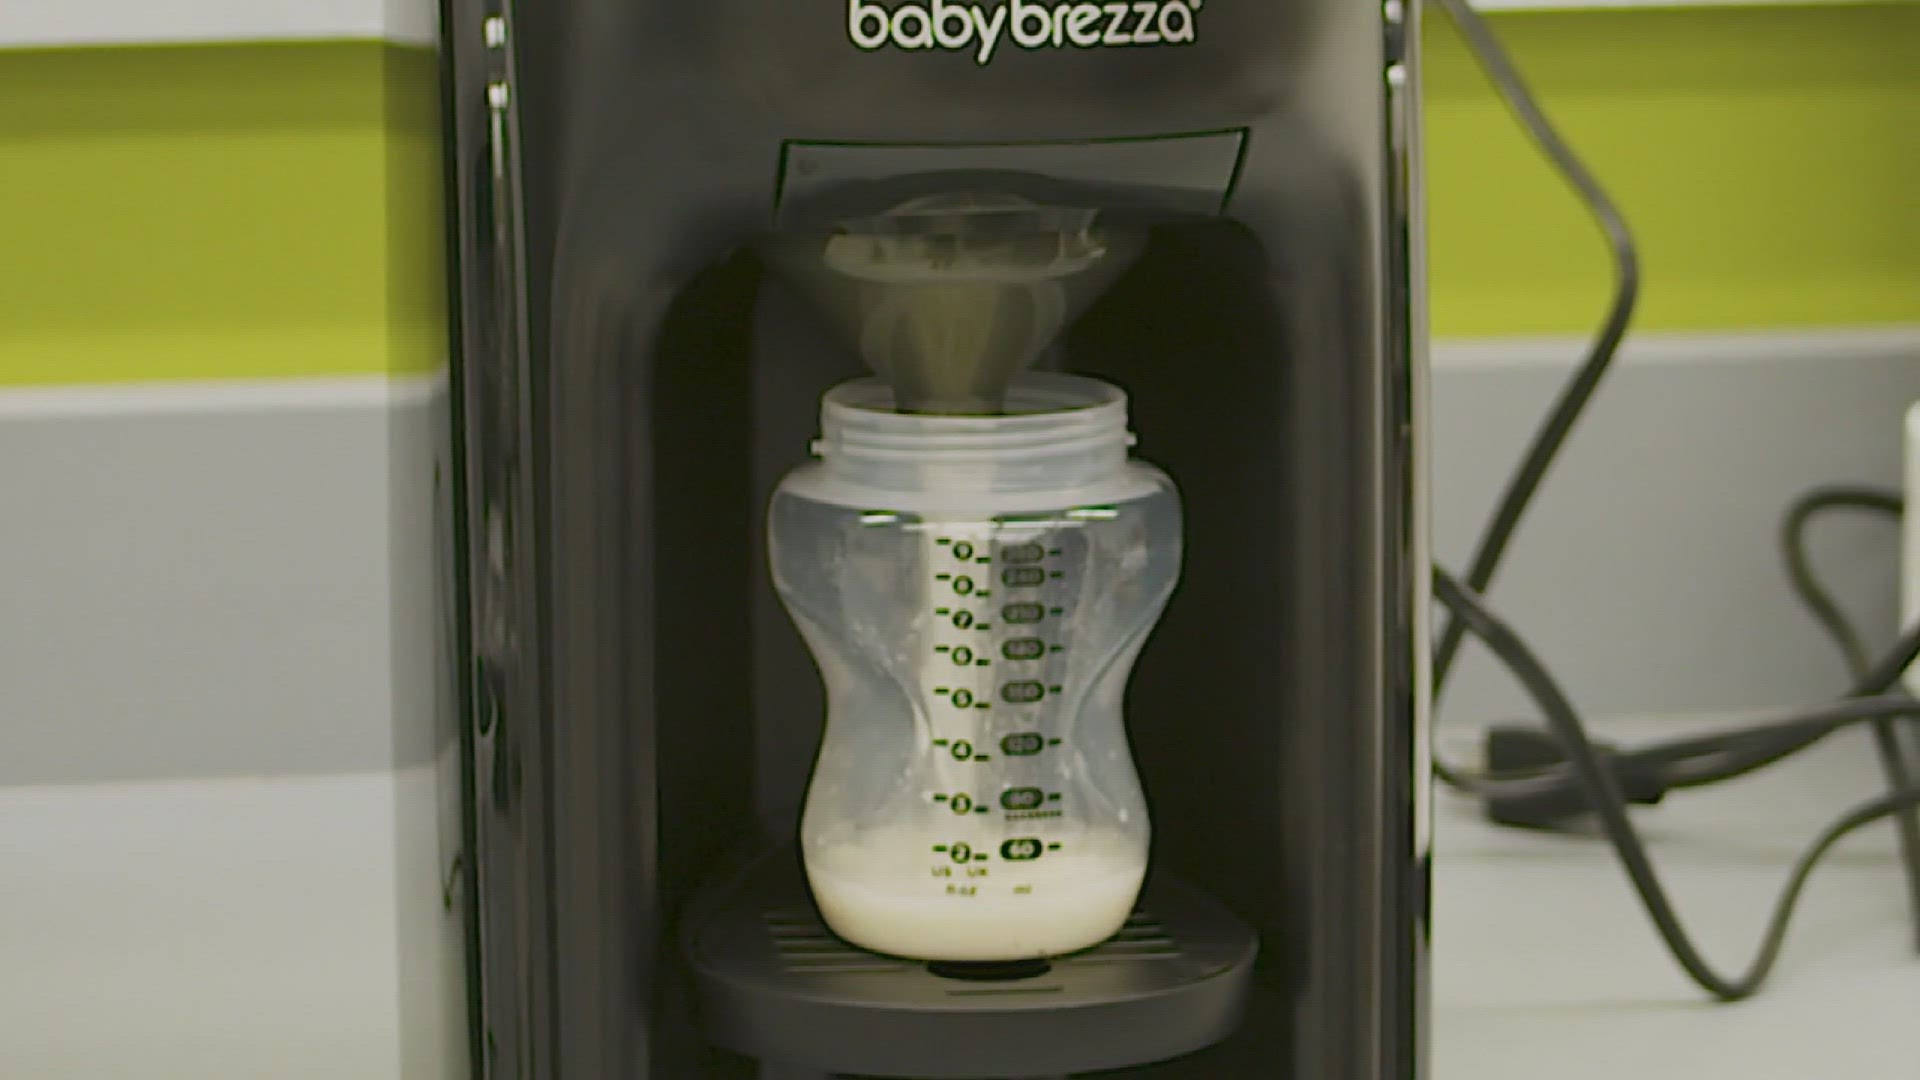 Newer gadgets called infant formula makers claim to make warm, ready-to-drink bottles. But are they worth the money and do they get the job done?